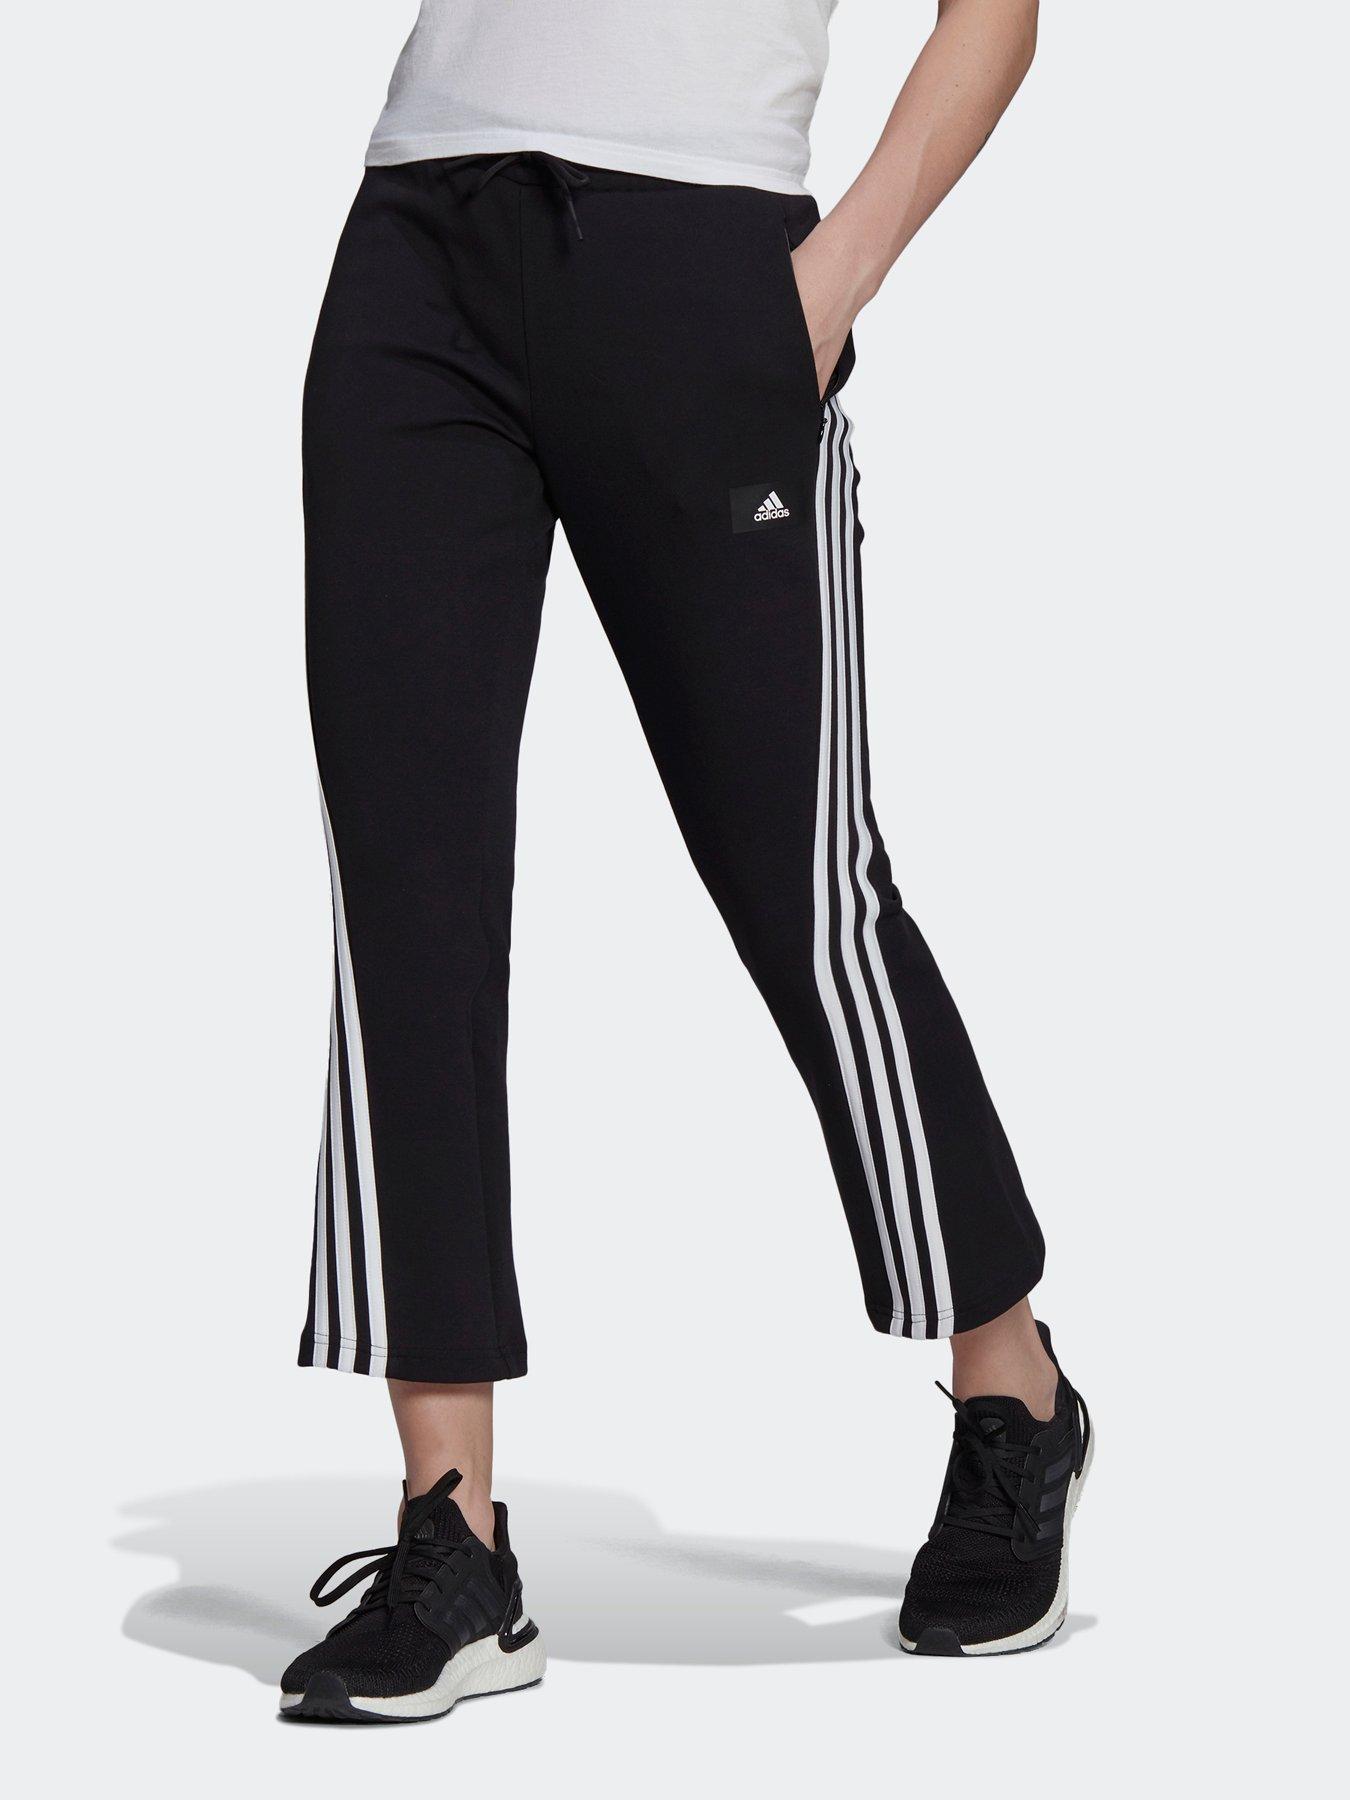  Sportswear Future Icons 3-stripes Flare Tracksuit Bottoms